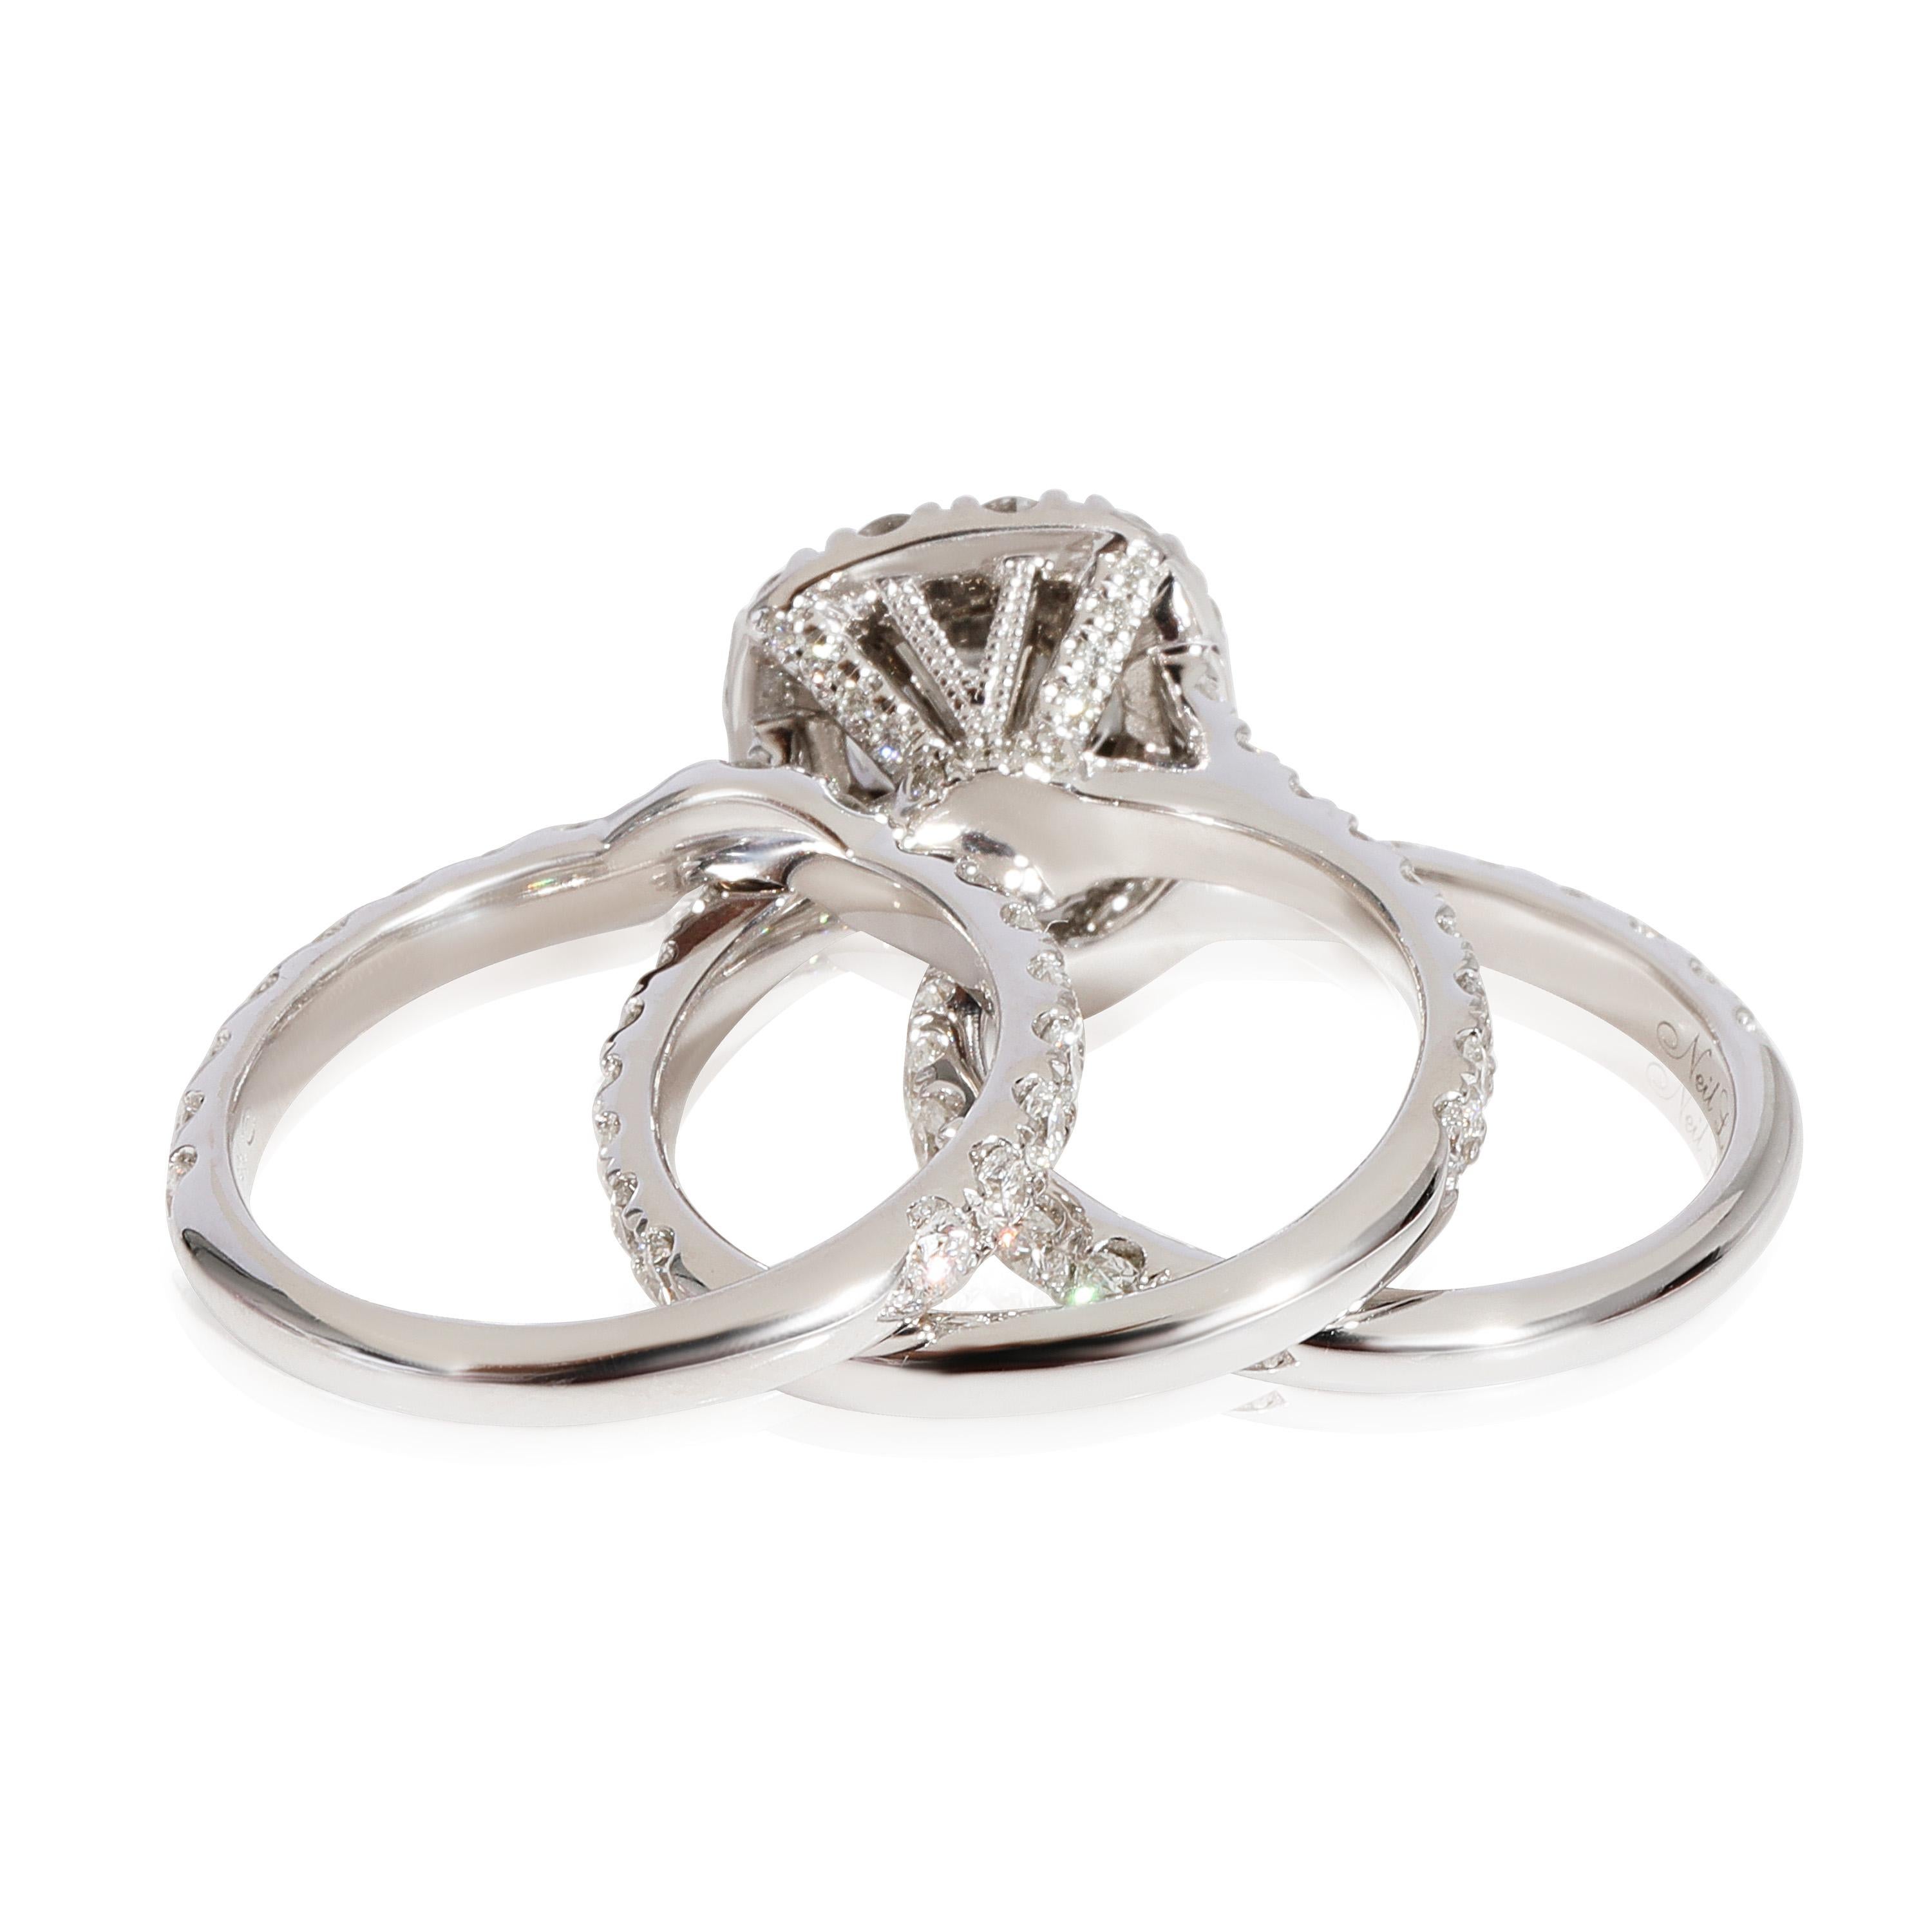 Neil Lane Diamond  Wedding Set in 14k White Gold I I2 4 CTW

PRIMARY DETAILS
SKU: 125114
Listing Title: Neil Lane Diamond  Wedding Set in 14k White Gold I I2 4 CTW
Condition Description: Retails for 19900 USD. In excellent condition and recently